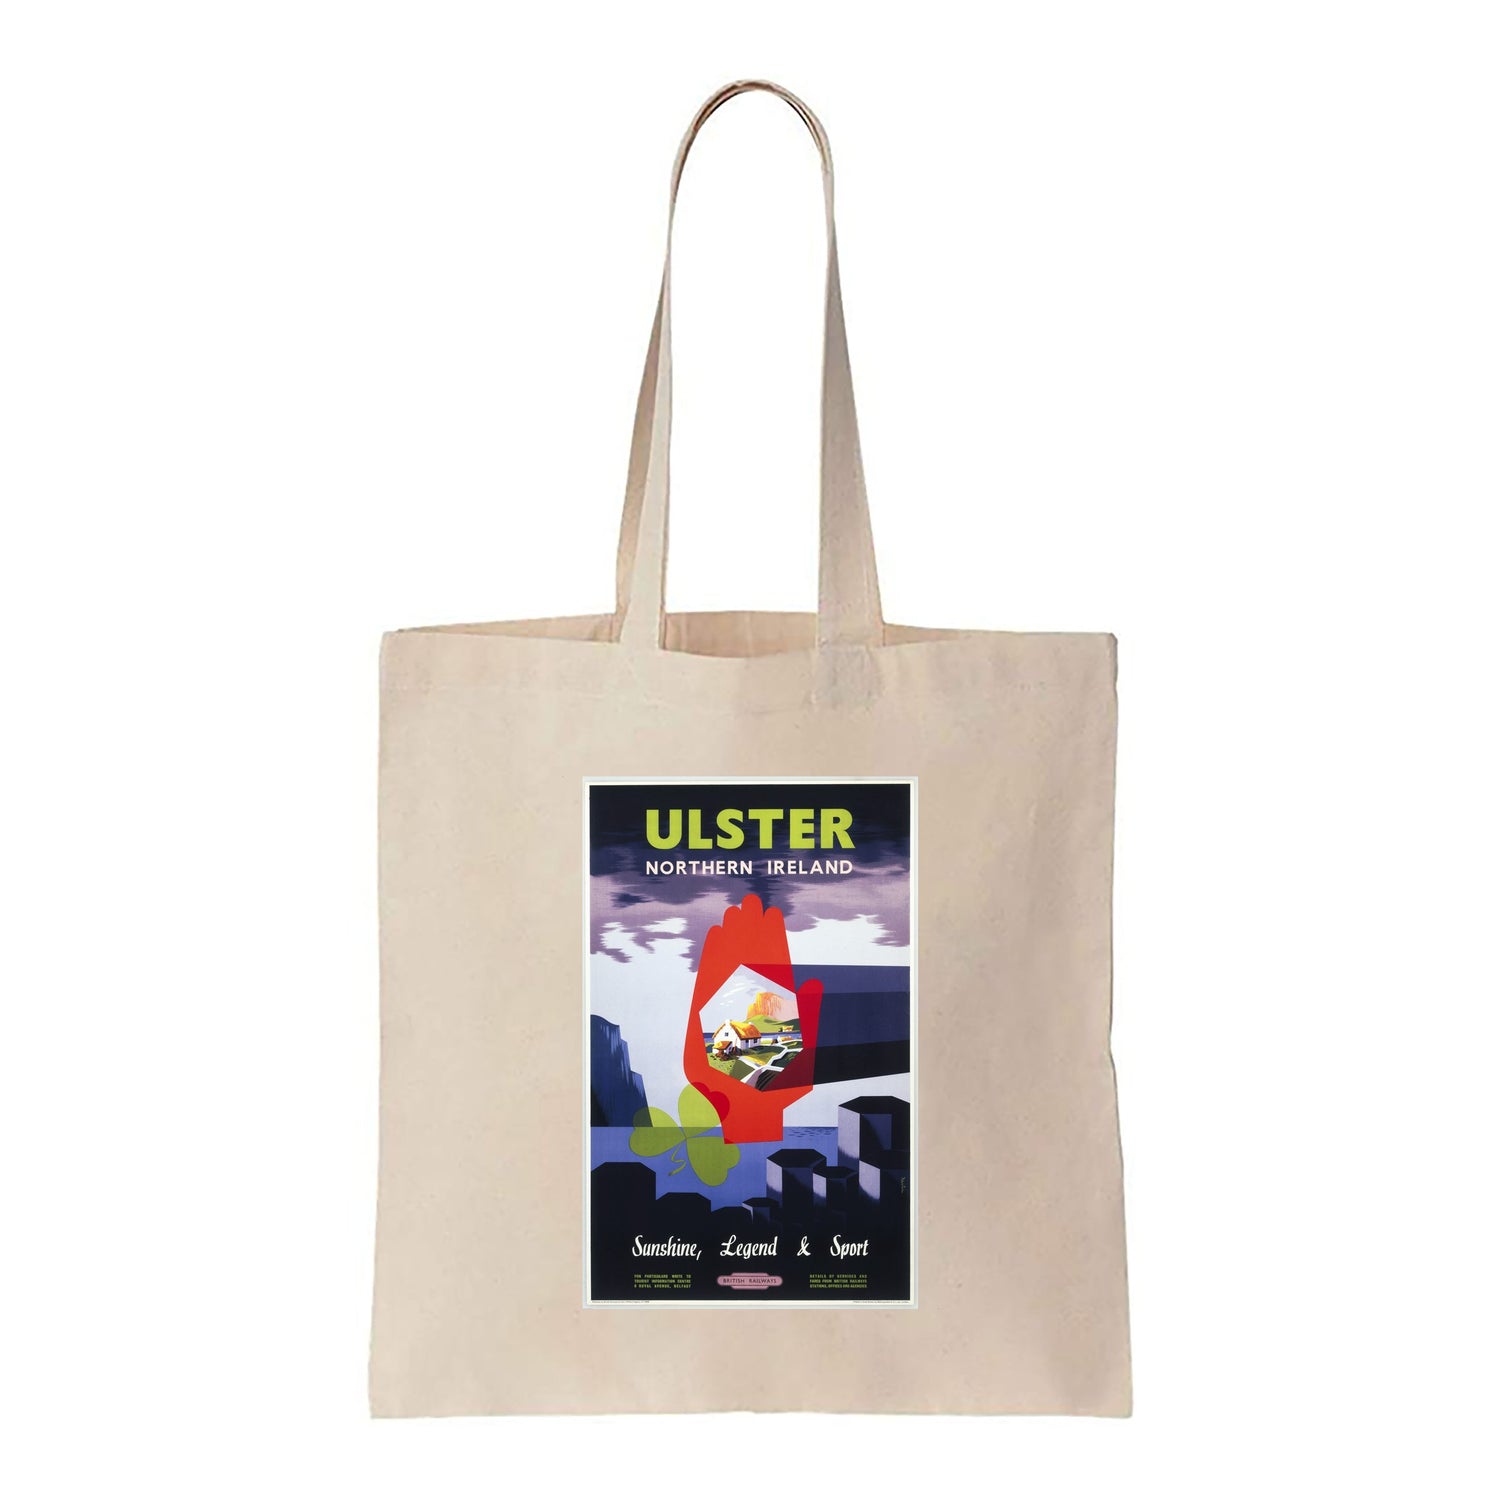 Ulster - Northern Ireland, Sunshine Legend and Sport - Canvas Tote Bag